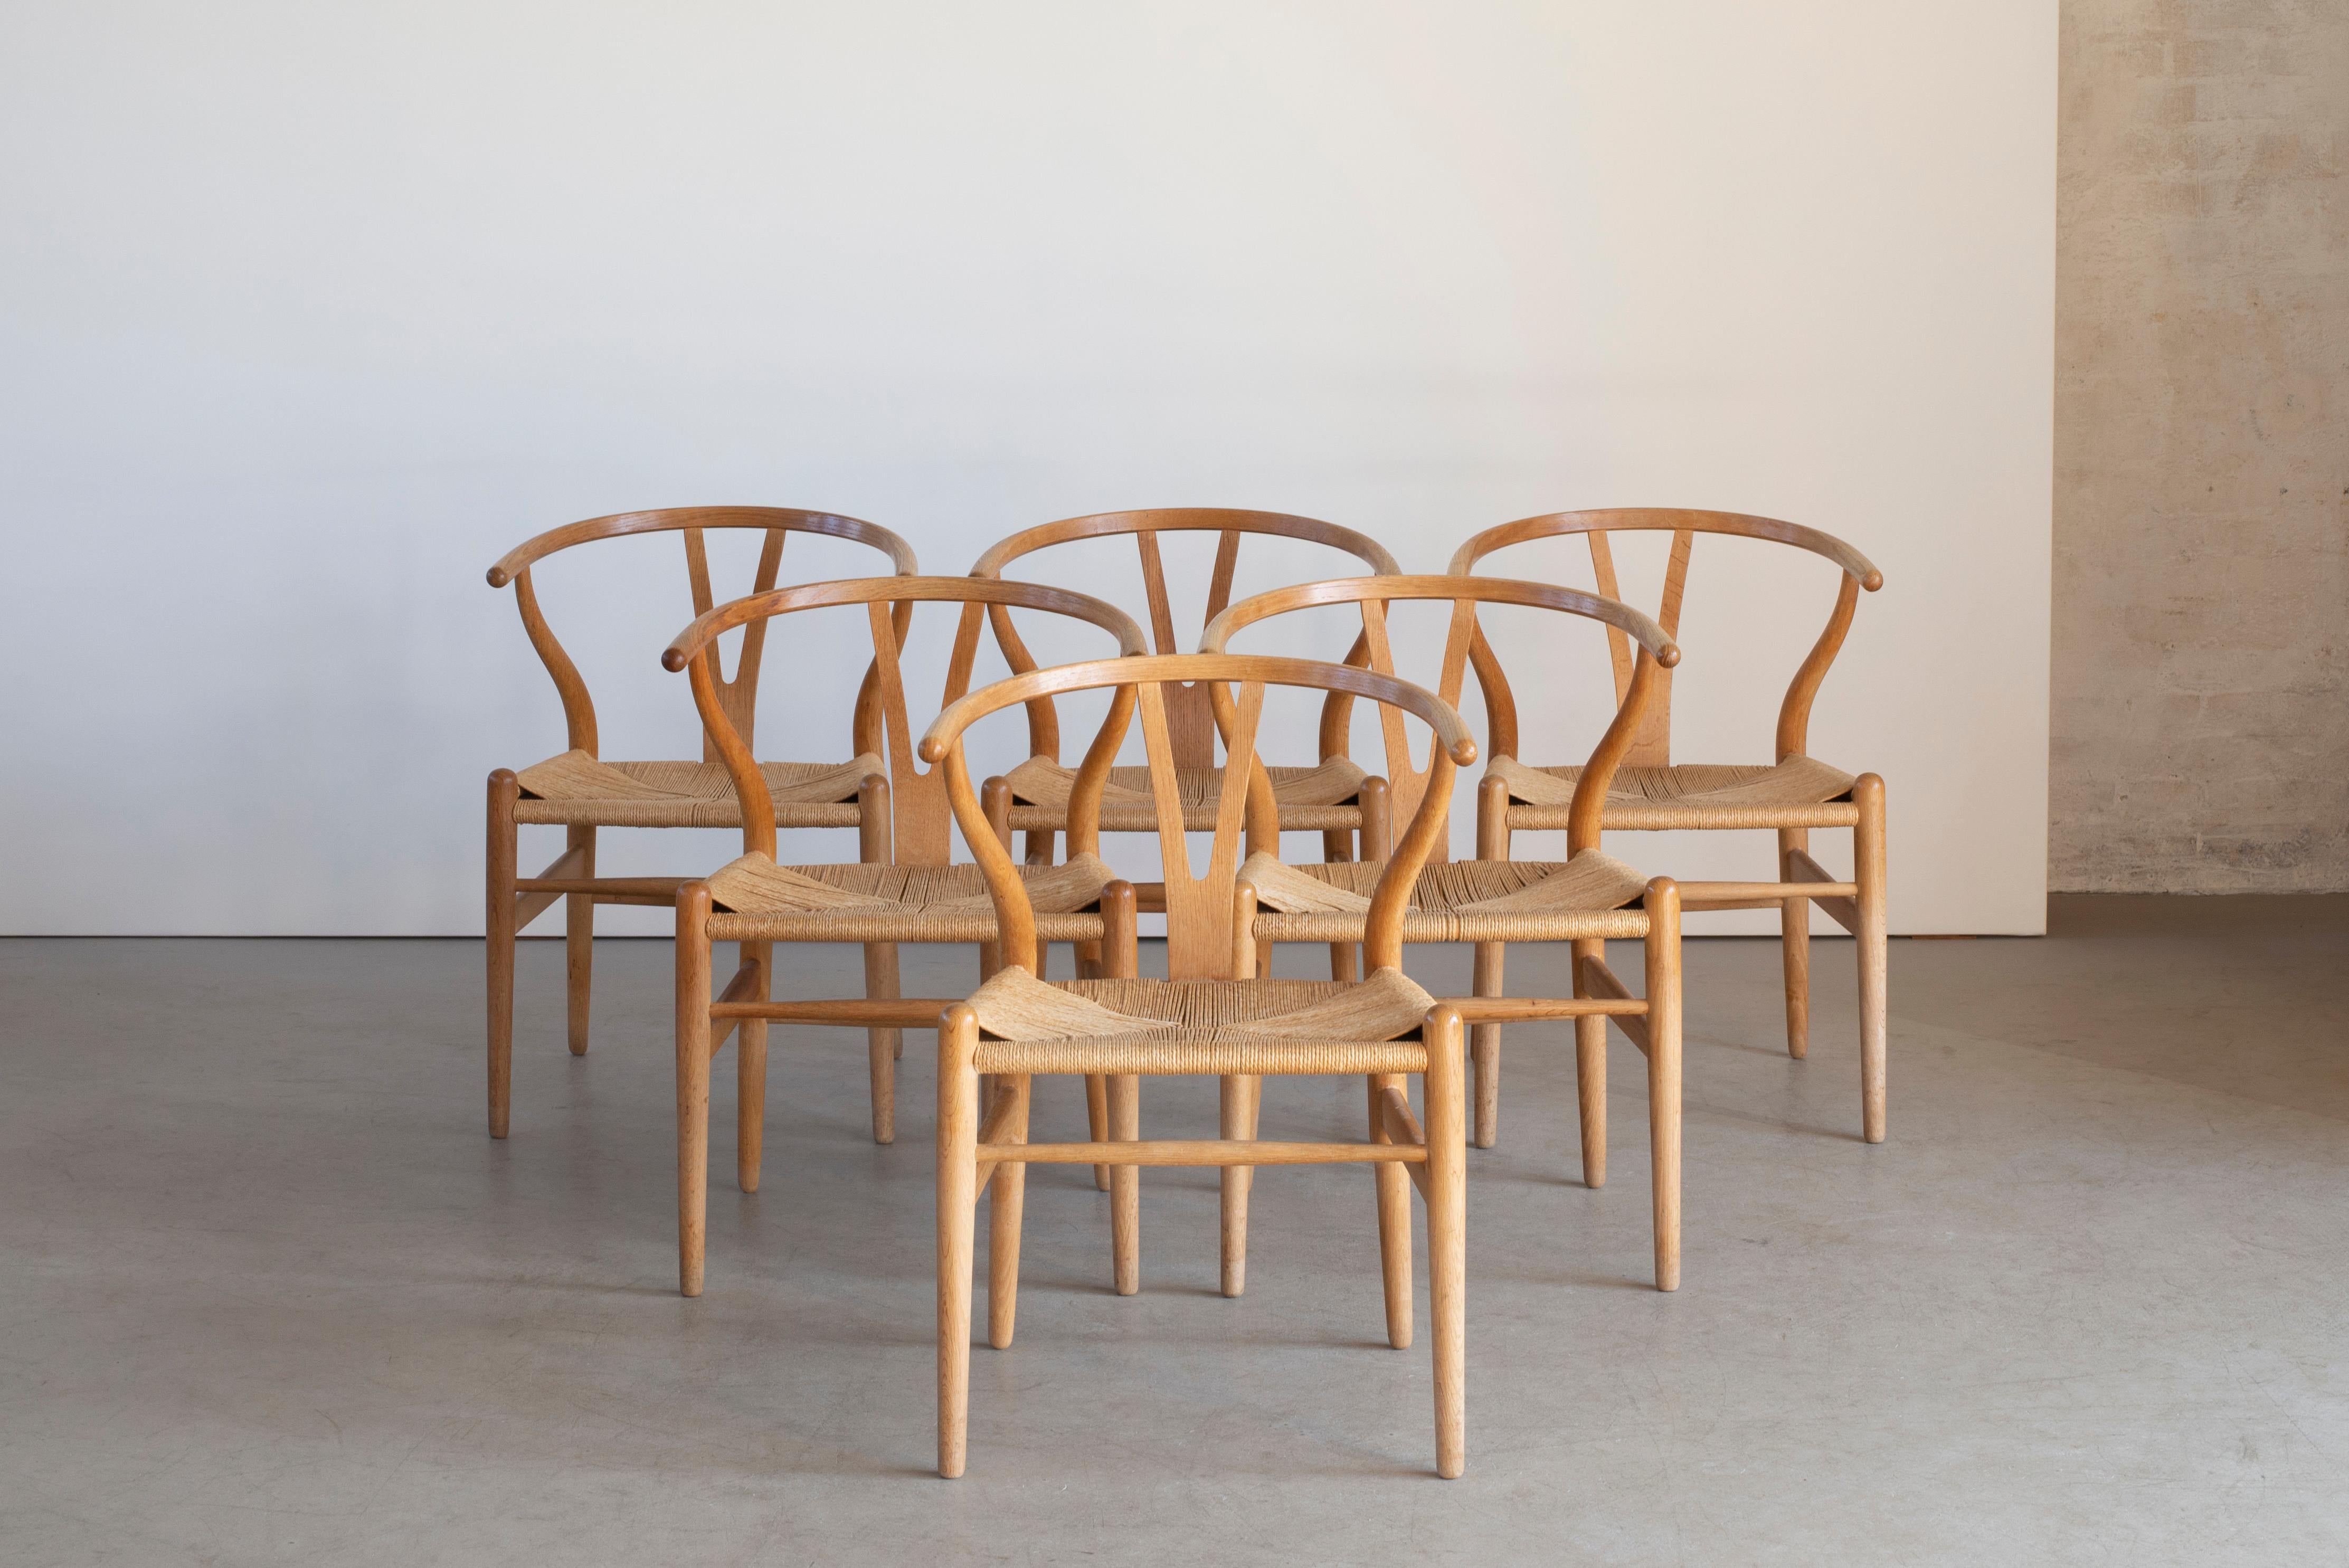 Hans J. Wegner “The Wishbone Chair”. Set of six armchairs of oak. Seat with woven papercord. CH 24. Designed 1949. Manufactured by Carl Hansen & Søn.